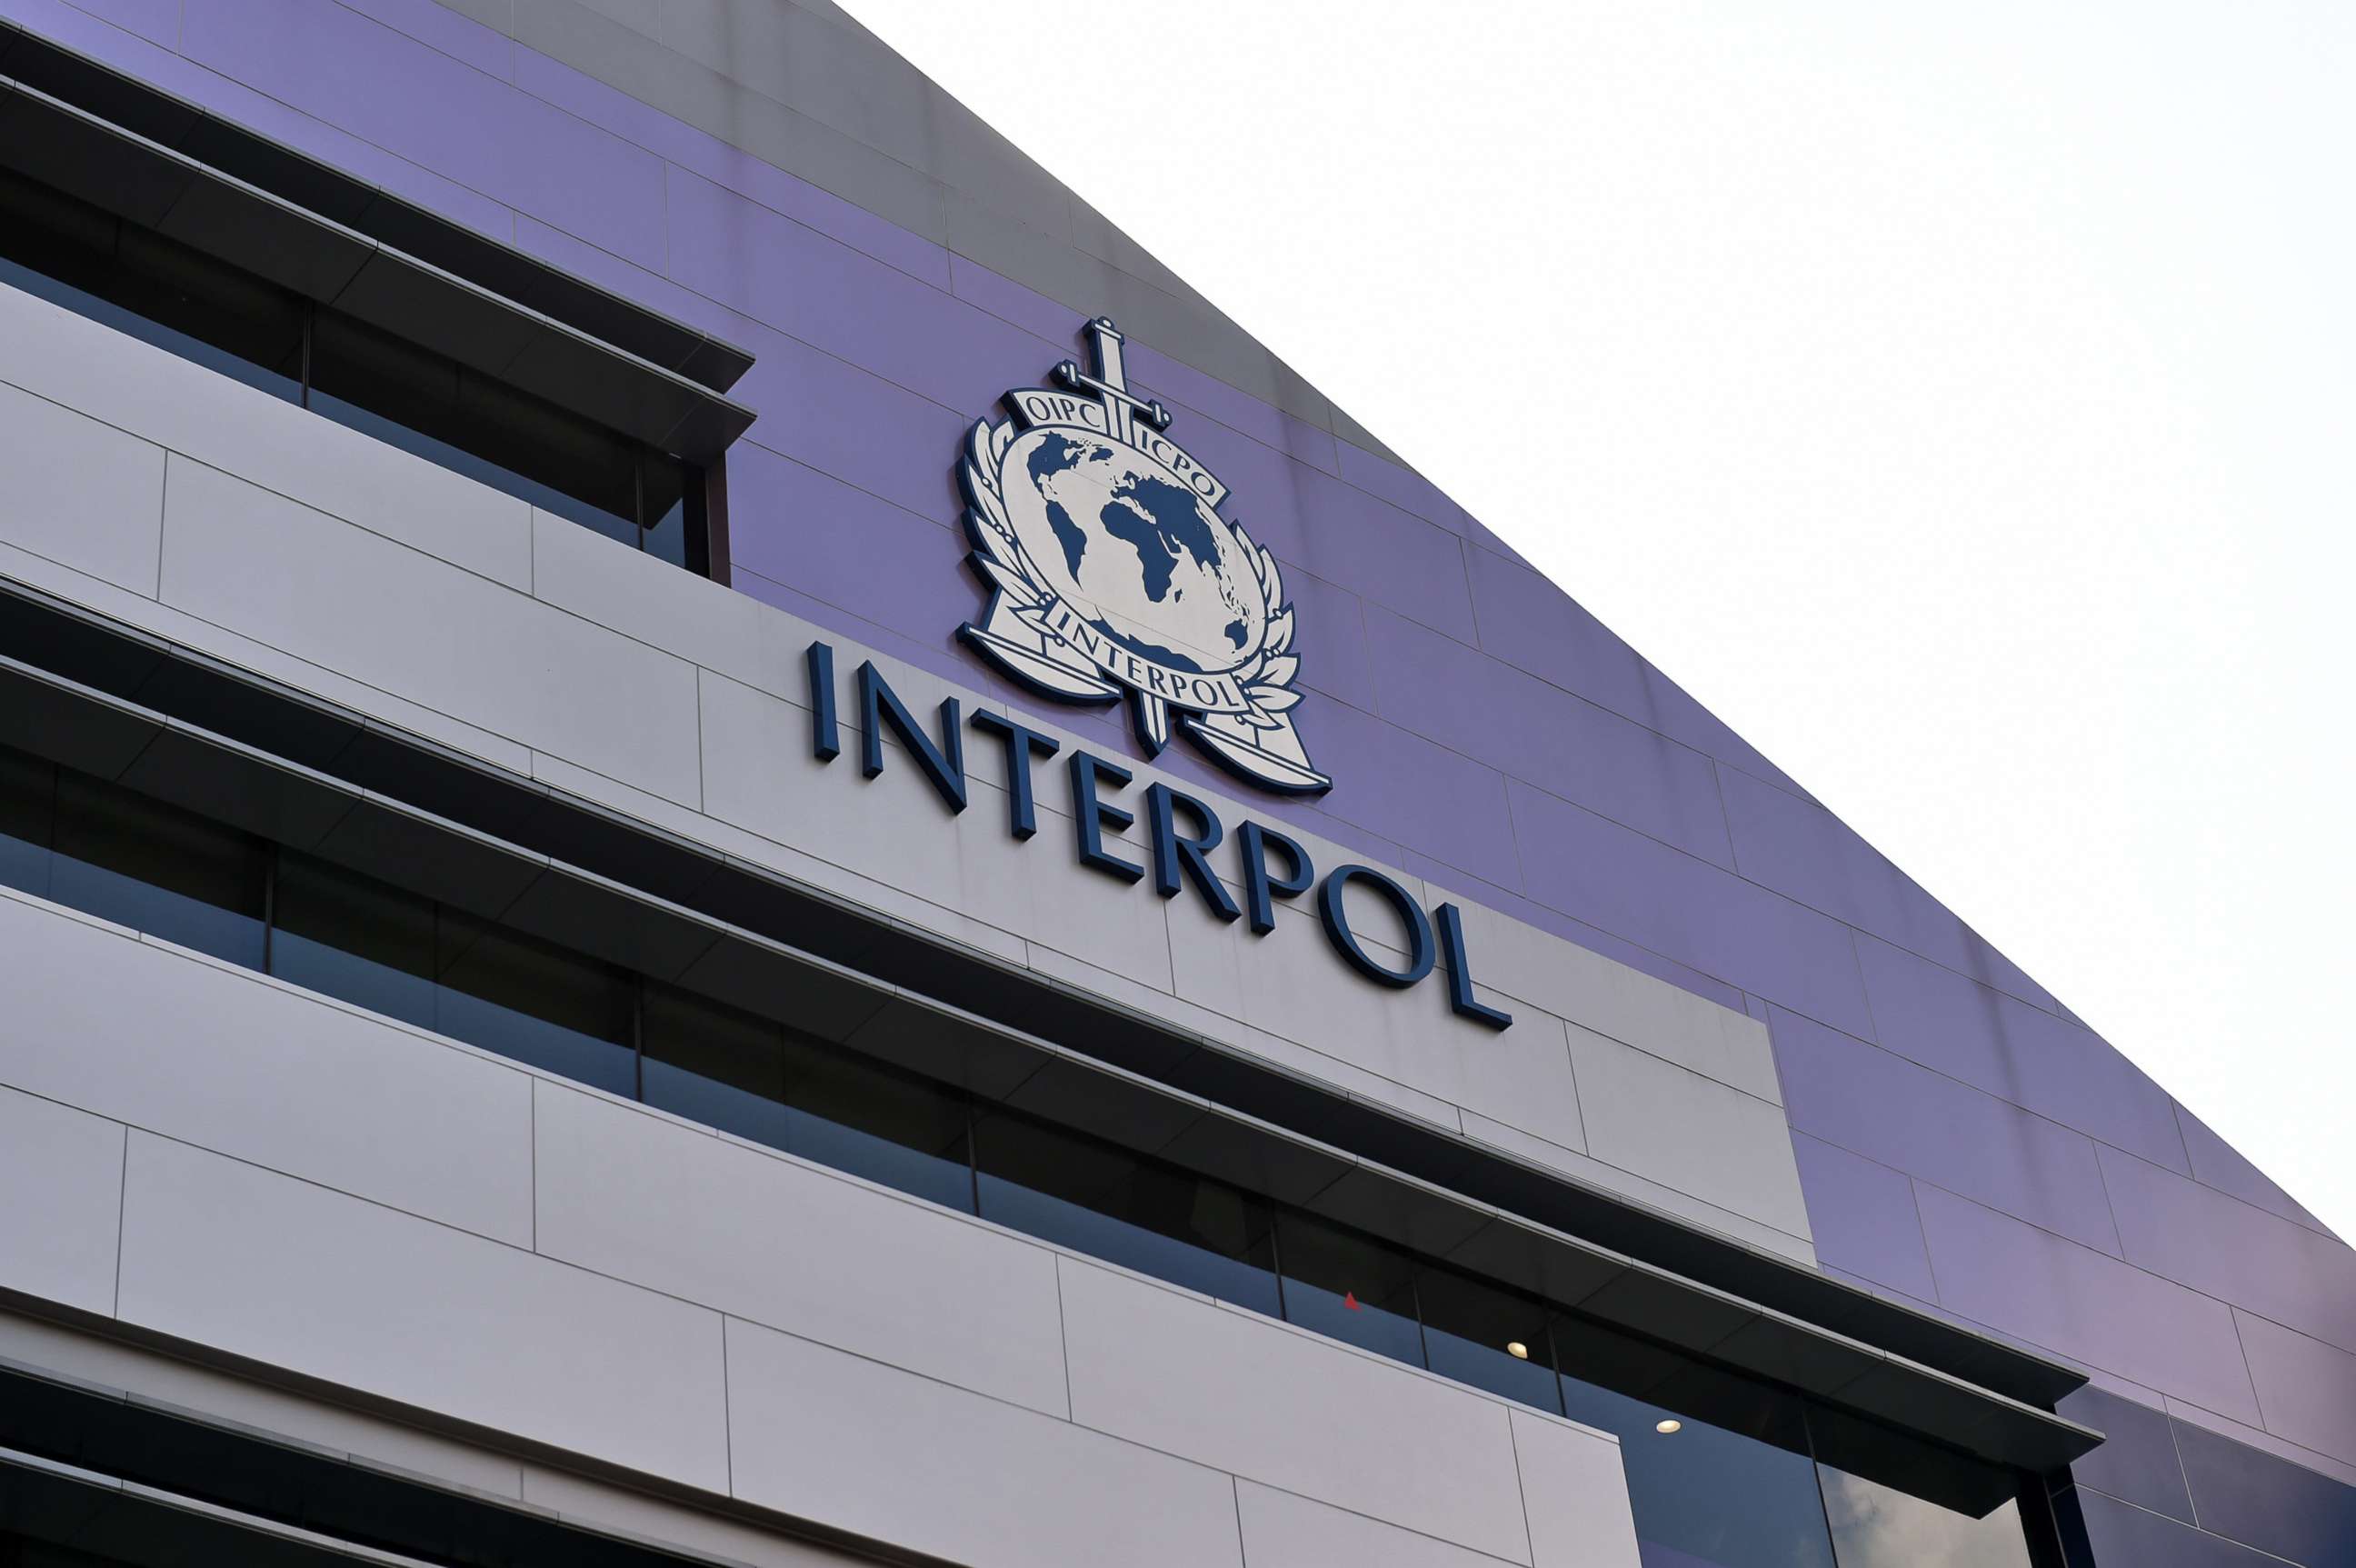 PHOTO: A logo at the newly completed Interpol Global Complex for Innovation building is seen during the inauguration opening ceremony in Singapore on April 13, 2015.